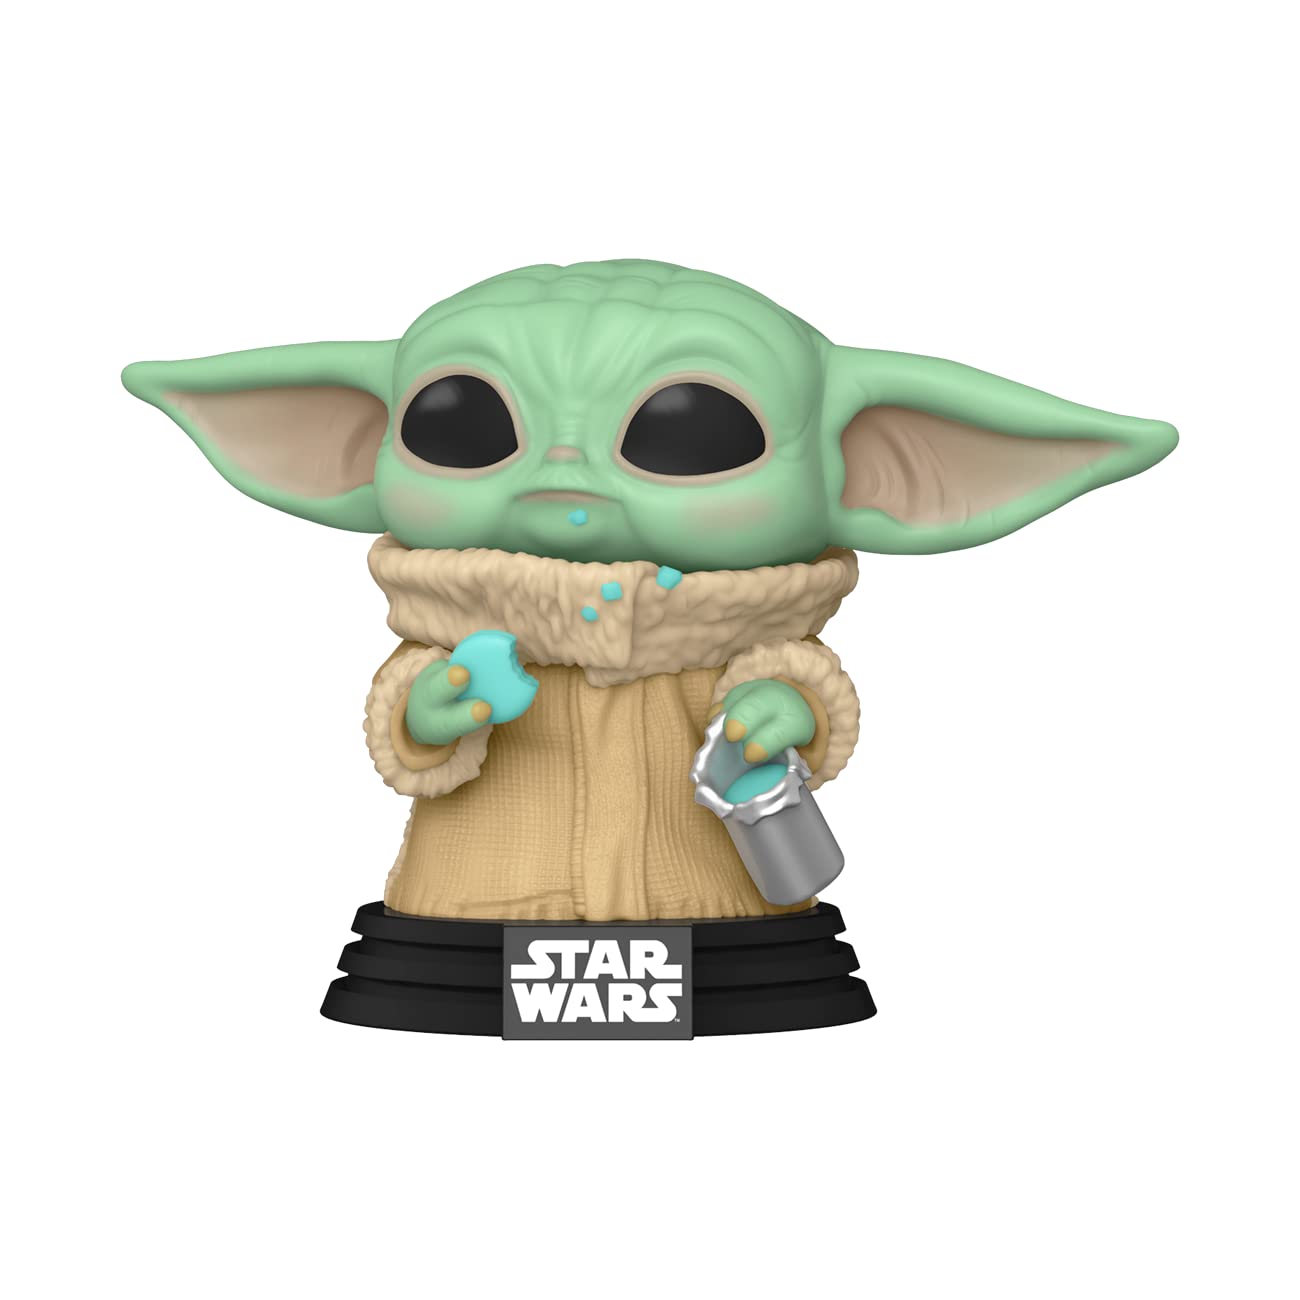 Funko POP! Star Wars: The Mandalorian - Grogu (The Child, Baby Yoda) with Cookie - Collectible Vinyl Figure - Gift Idea - Official Merchandise - for Kids & Adults - TV Fans